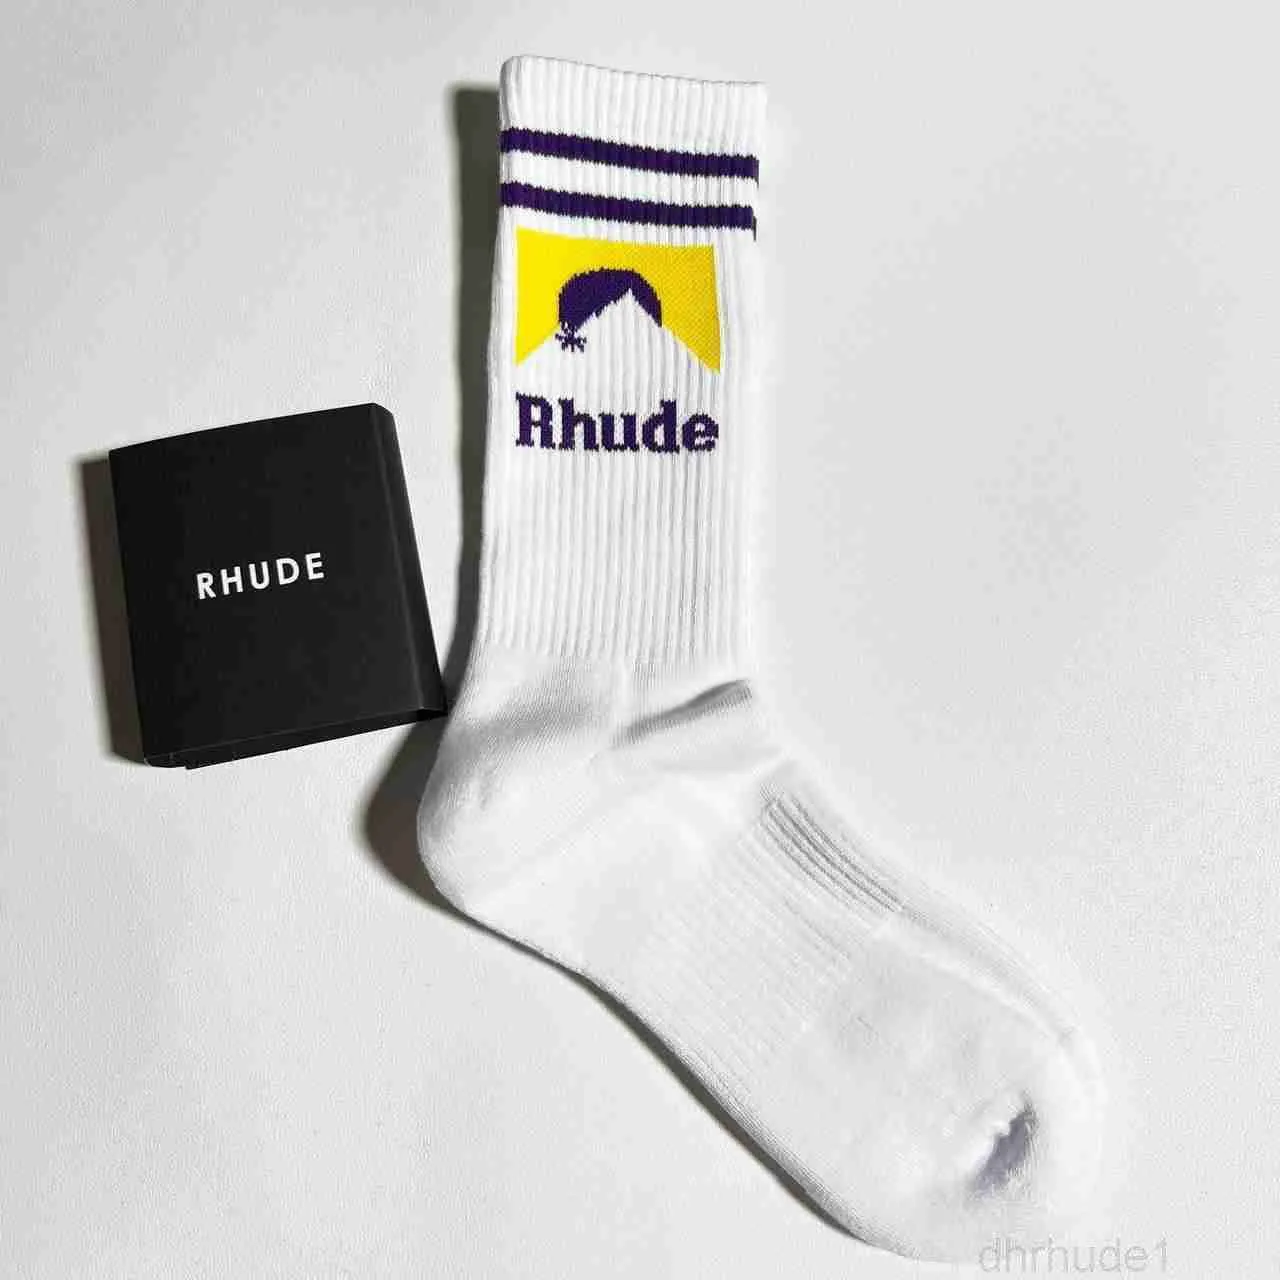 Rhude Designer Socks for Mens Womens Luxury High Quality Stockings Fashion Classic Cotton Comfortable Knitted Socks Antibacterial Deodorant and Breathable A8bd